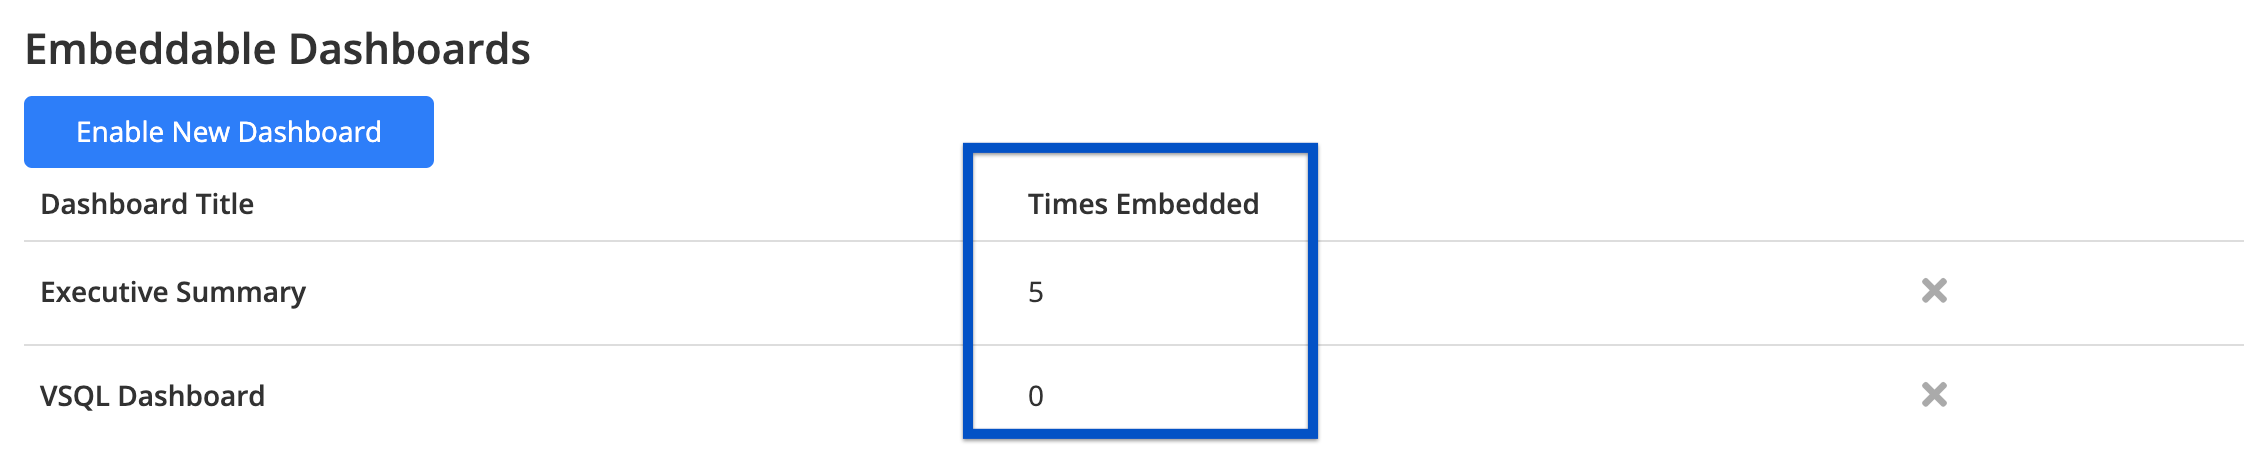 View the number of times a dashboard has been embedded